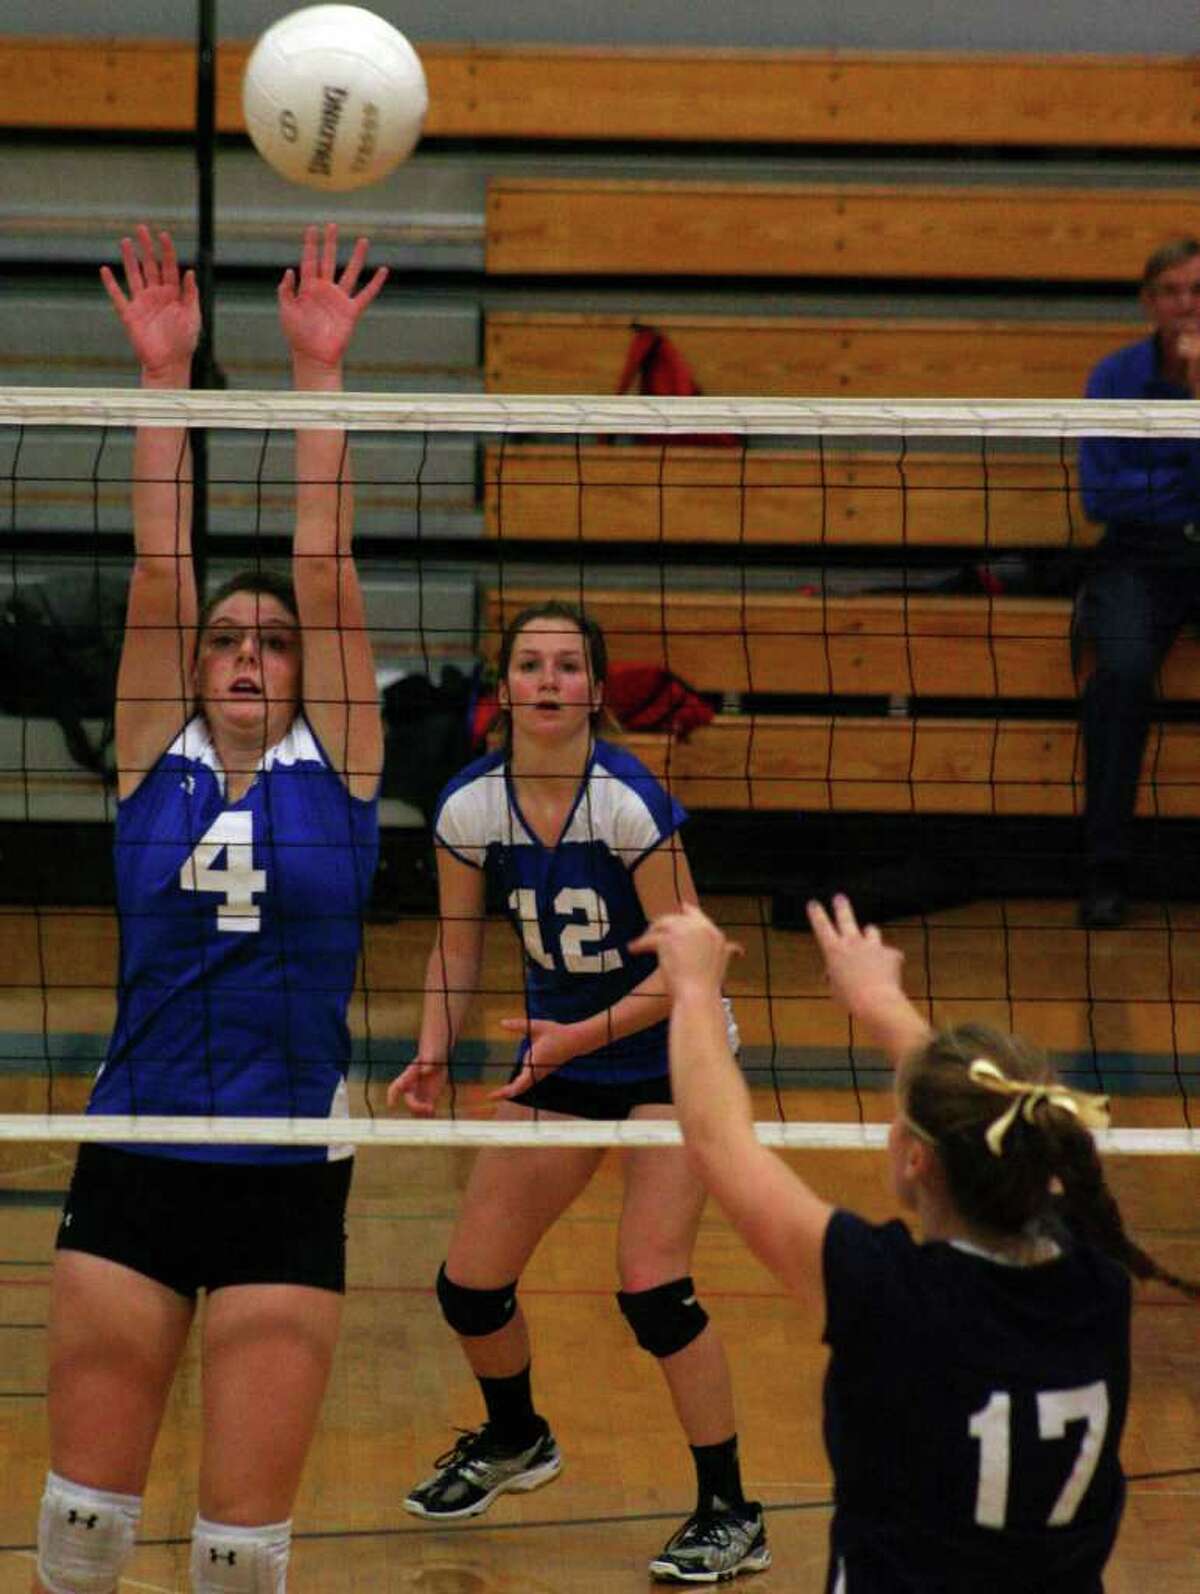 Fairfield Ludlowe's Dillon Casey blocks Staples' Kenzie Roof as Emily Nelson looks on in the Falcons 3-1 FCIAC quarterfinal win over the Wreckers on Tuesday night in Fairfield.